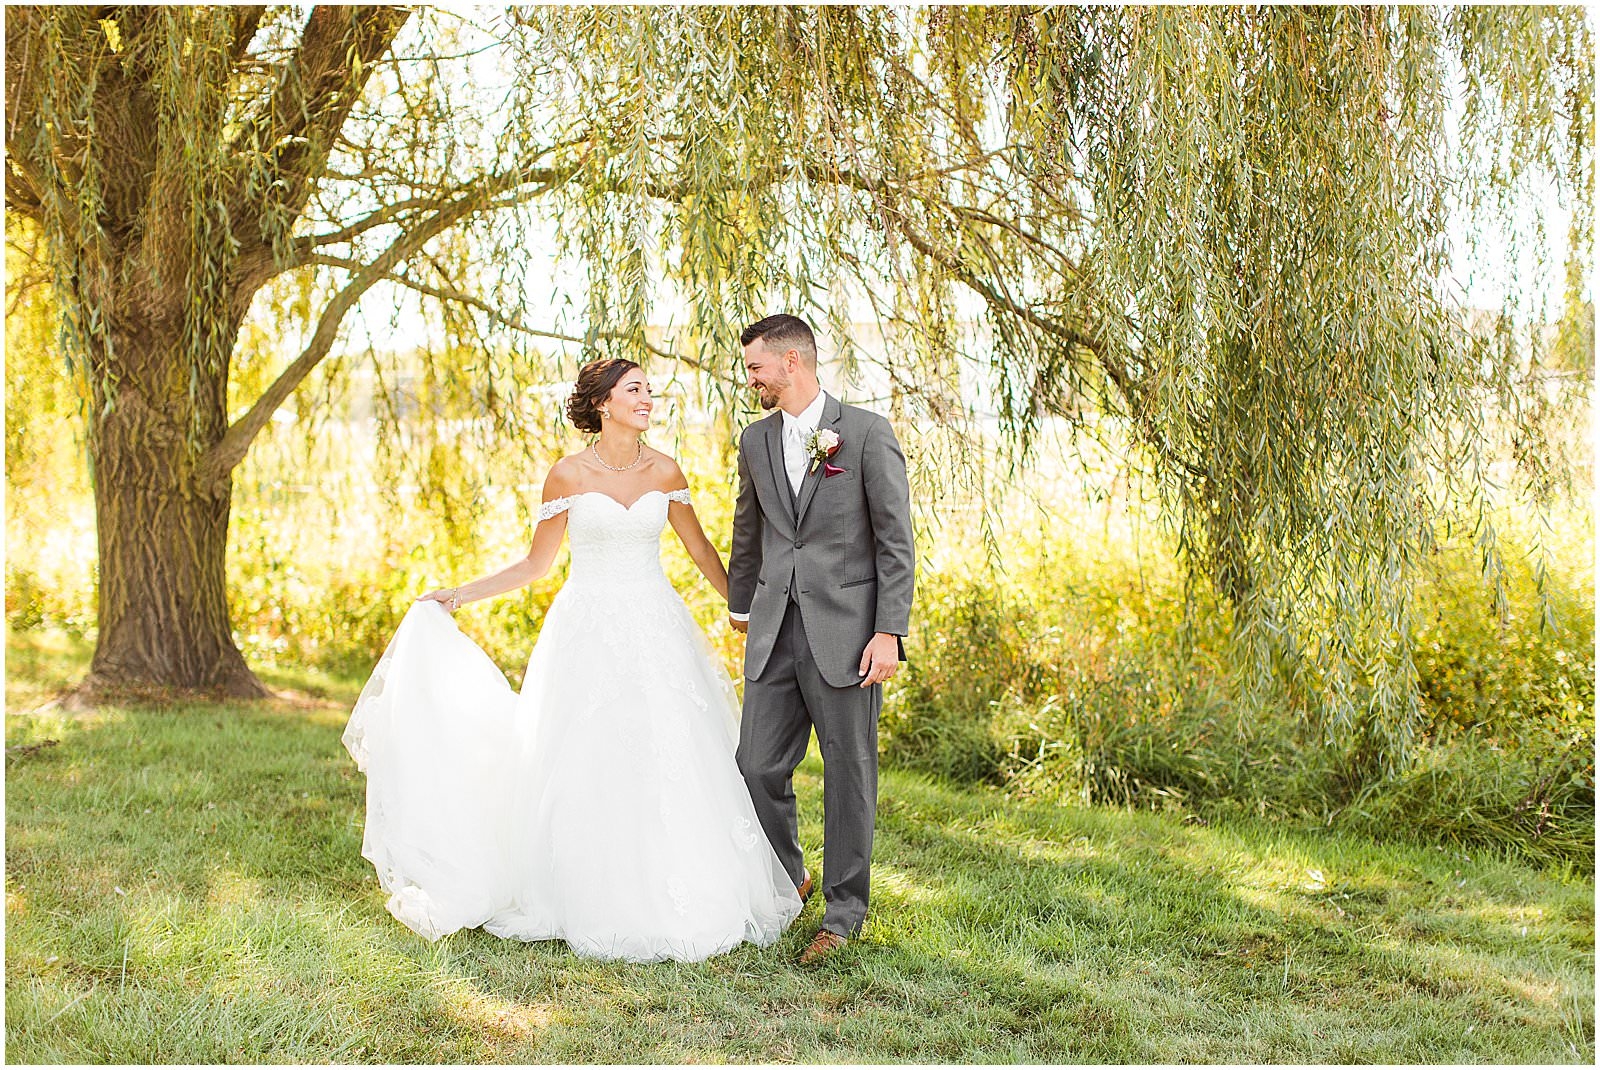 A Stunning Fall Wedding in Indianapolis, IN |. Sally and Andrew | Bret and Brandie Photography 0070.jpg